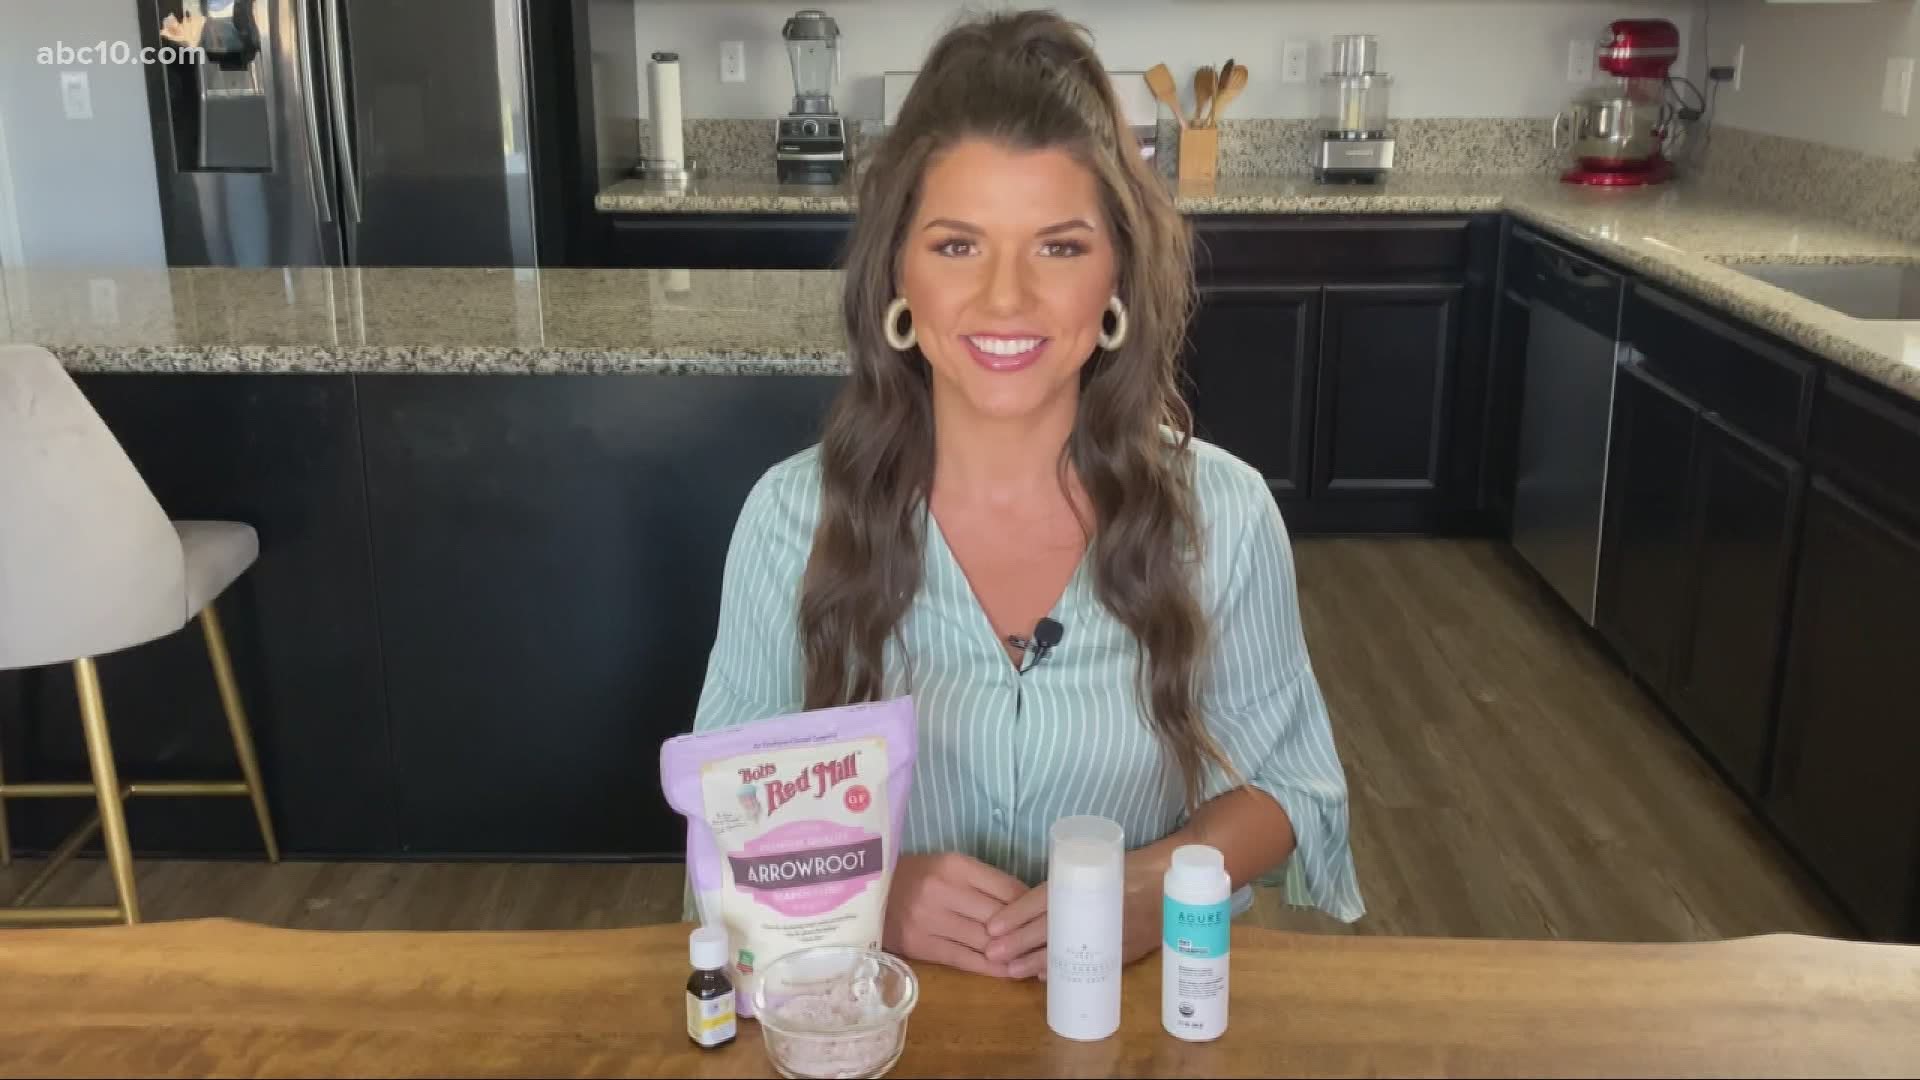 Dry "shampoo" soaks up oils to control oil and keep hair looking fresh between washes. Check out Megan Evan's recipe and two favorite, healthy brands.